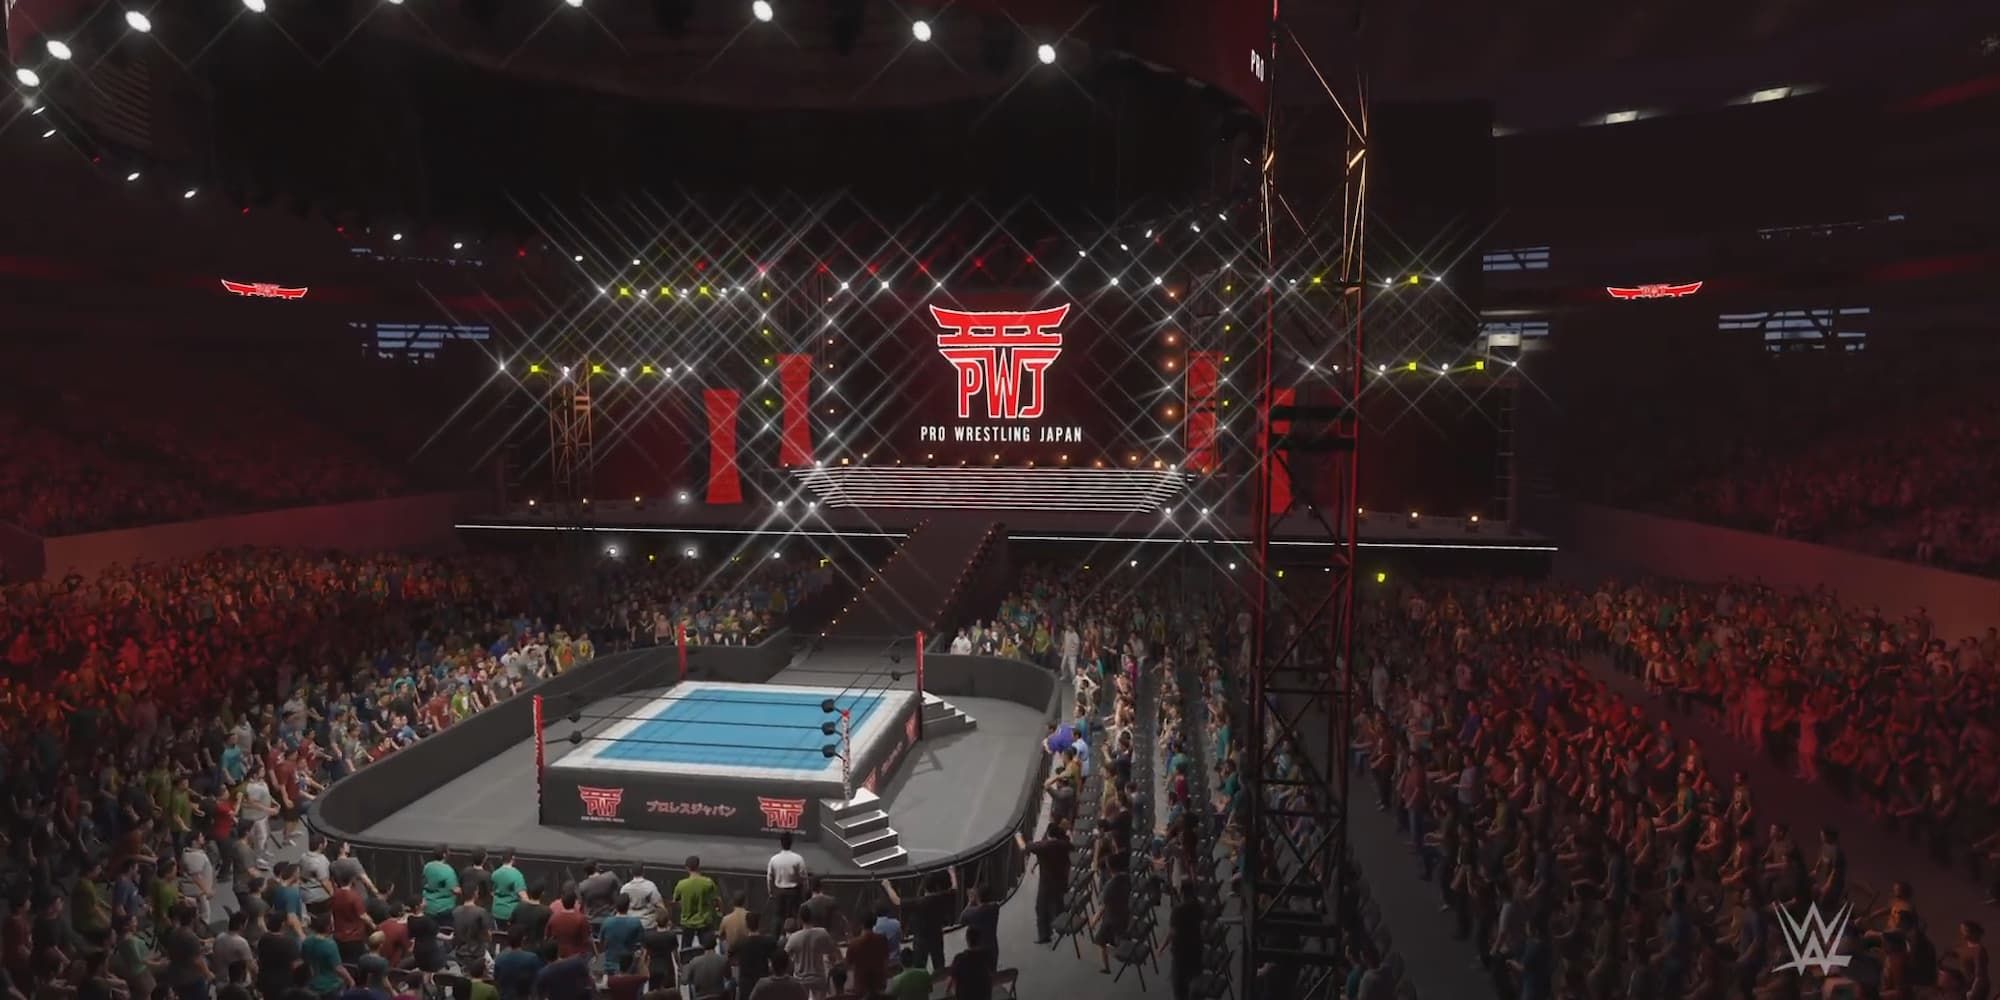 The Japan Dome is packed in WWE 2K23 and shows the logo of the game's fictional promotion known as Pro Wrestling Japan.